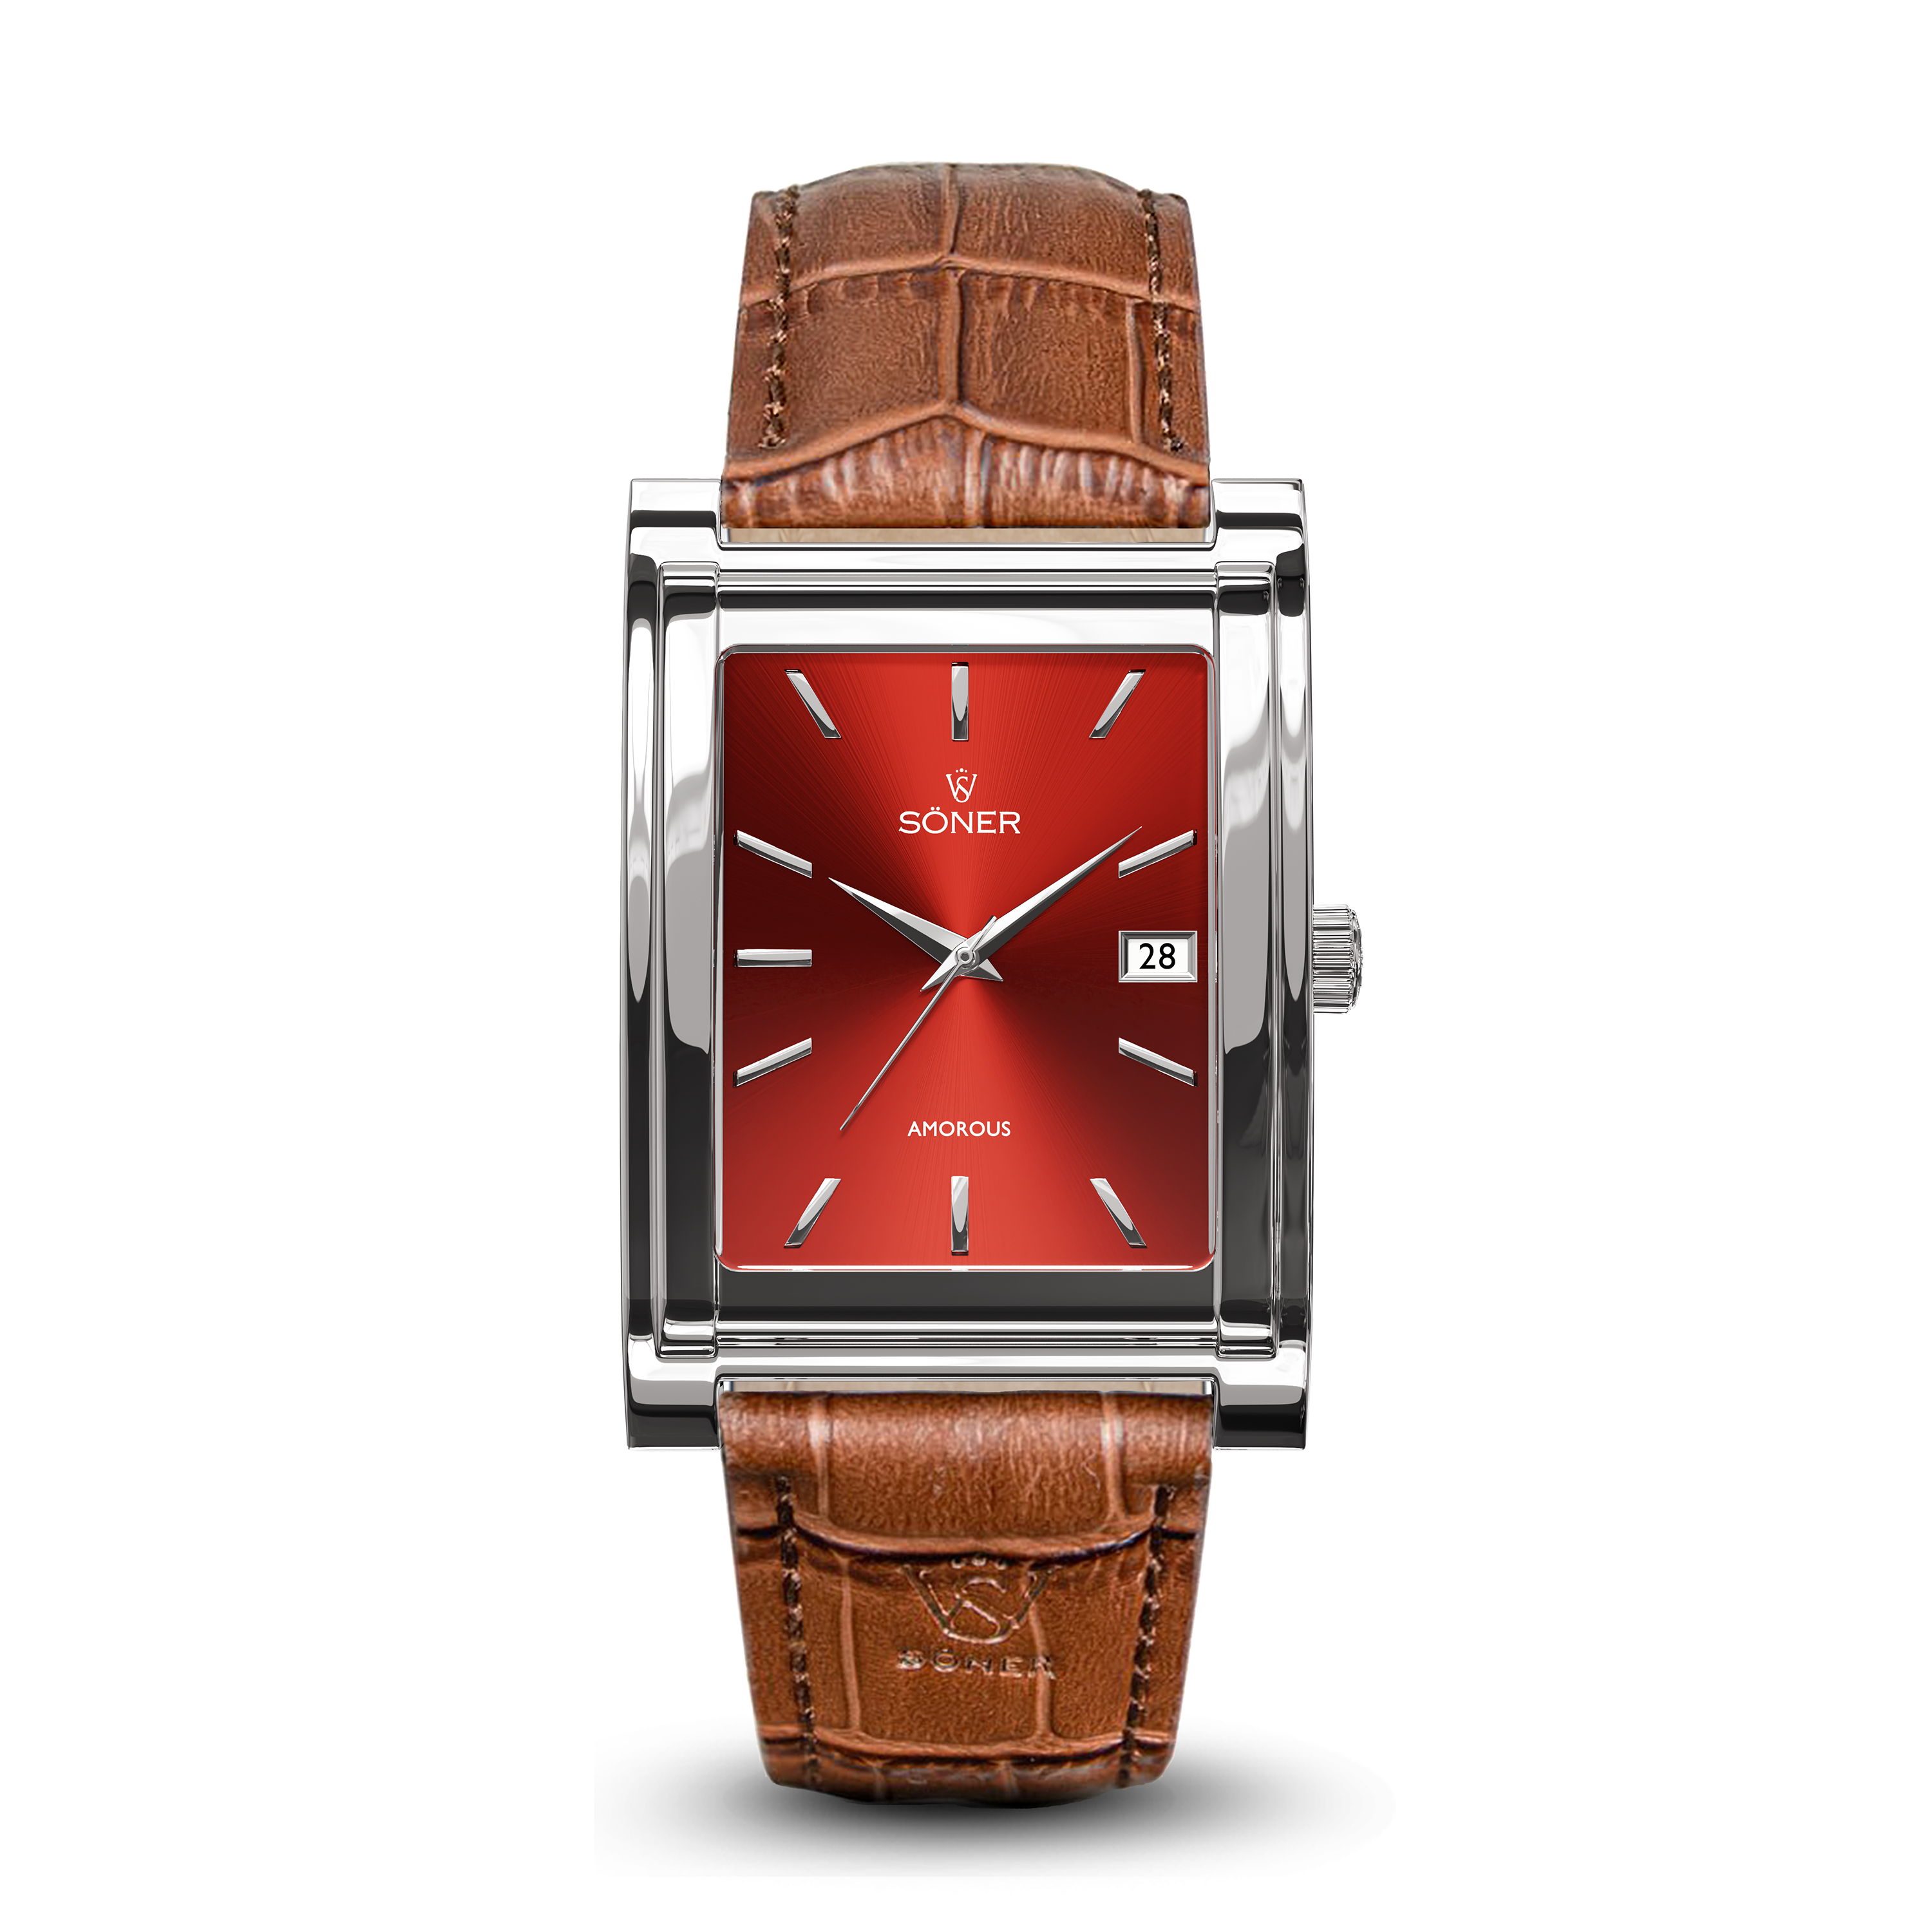 Square automatic watch, Amorous Rio with red dial - brown alligator pattern leather strap front view